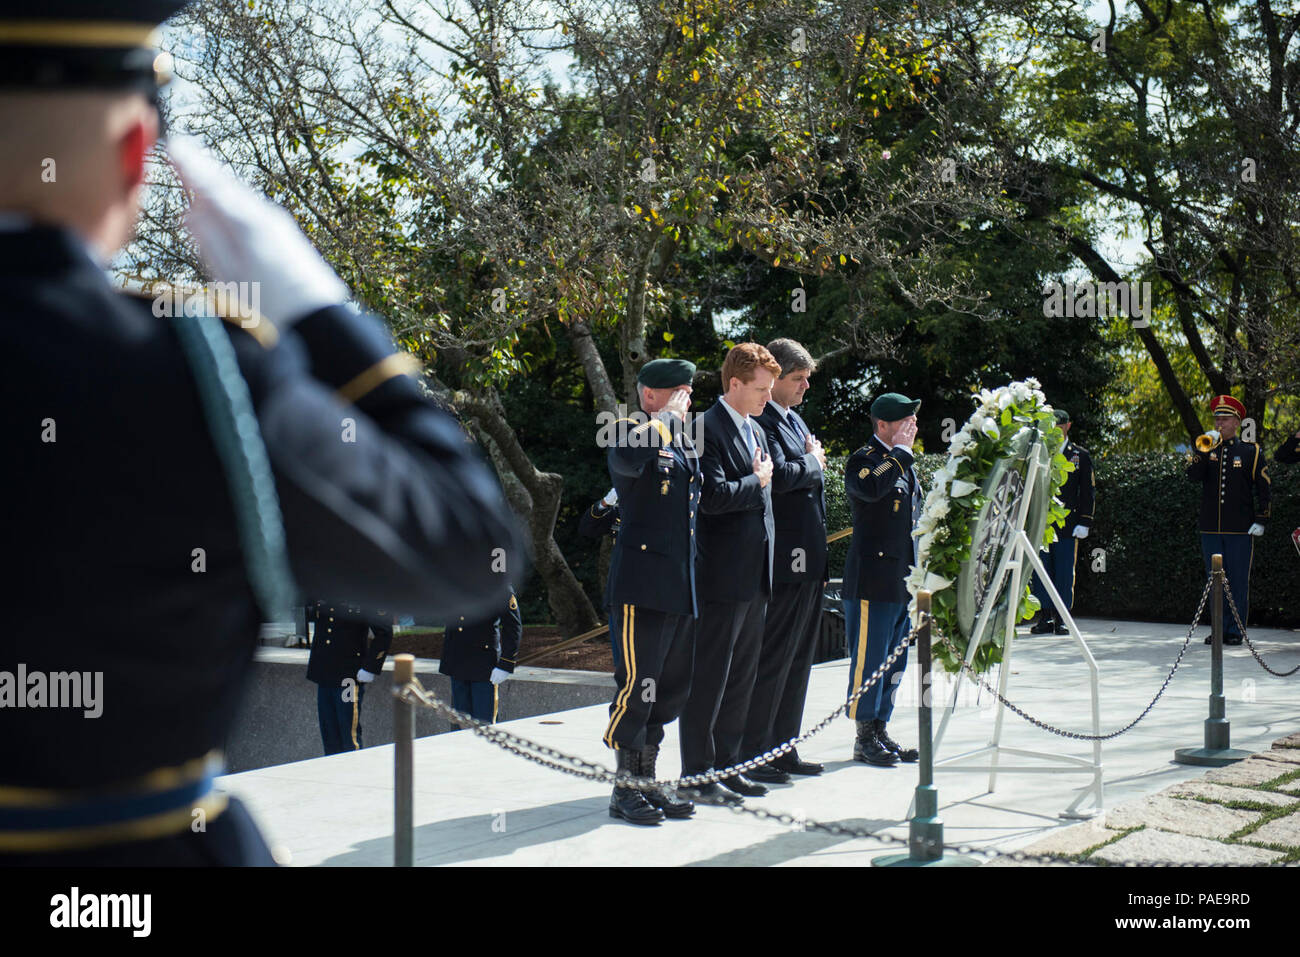 (From the left) U.S. Army Maj. Gen. Fran Beaudette, commanding general, 1st Special Forces Command (Airborne); Congressman Joe Kennedy III; Dr. William Kennedy Smith; and Command Sgt. Maj. Brian Rarey, 1st SFC (A) Command Sergeant Major; renders honors during the 1st Special Forces Command (Airborne) Wreath-Laying Ceremony at the gravesite of President John F. Kennedy at Arlington National Cemetery, Arlington, Virginia, Oct. 25, 2017.  Kennedy contributed greatly to the Special Forces, including authorizing the “Green Beret” as the official headgear for all U.S. Army Special Forces. Stock Photo